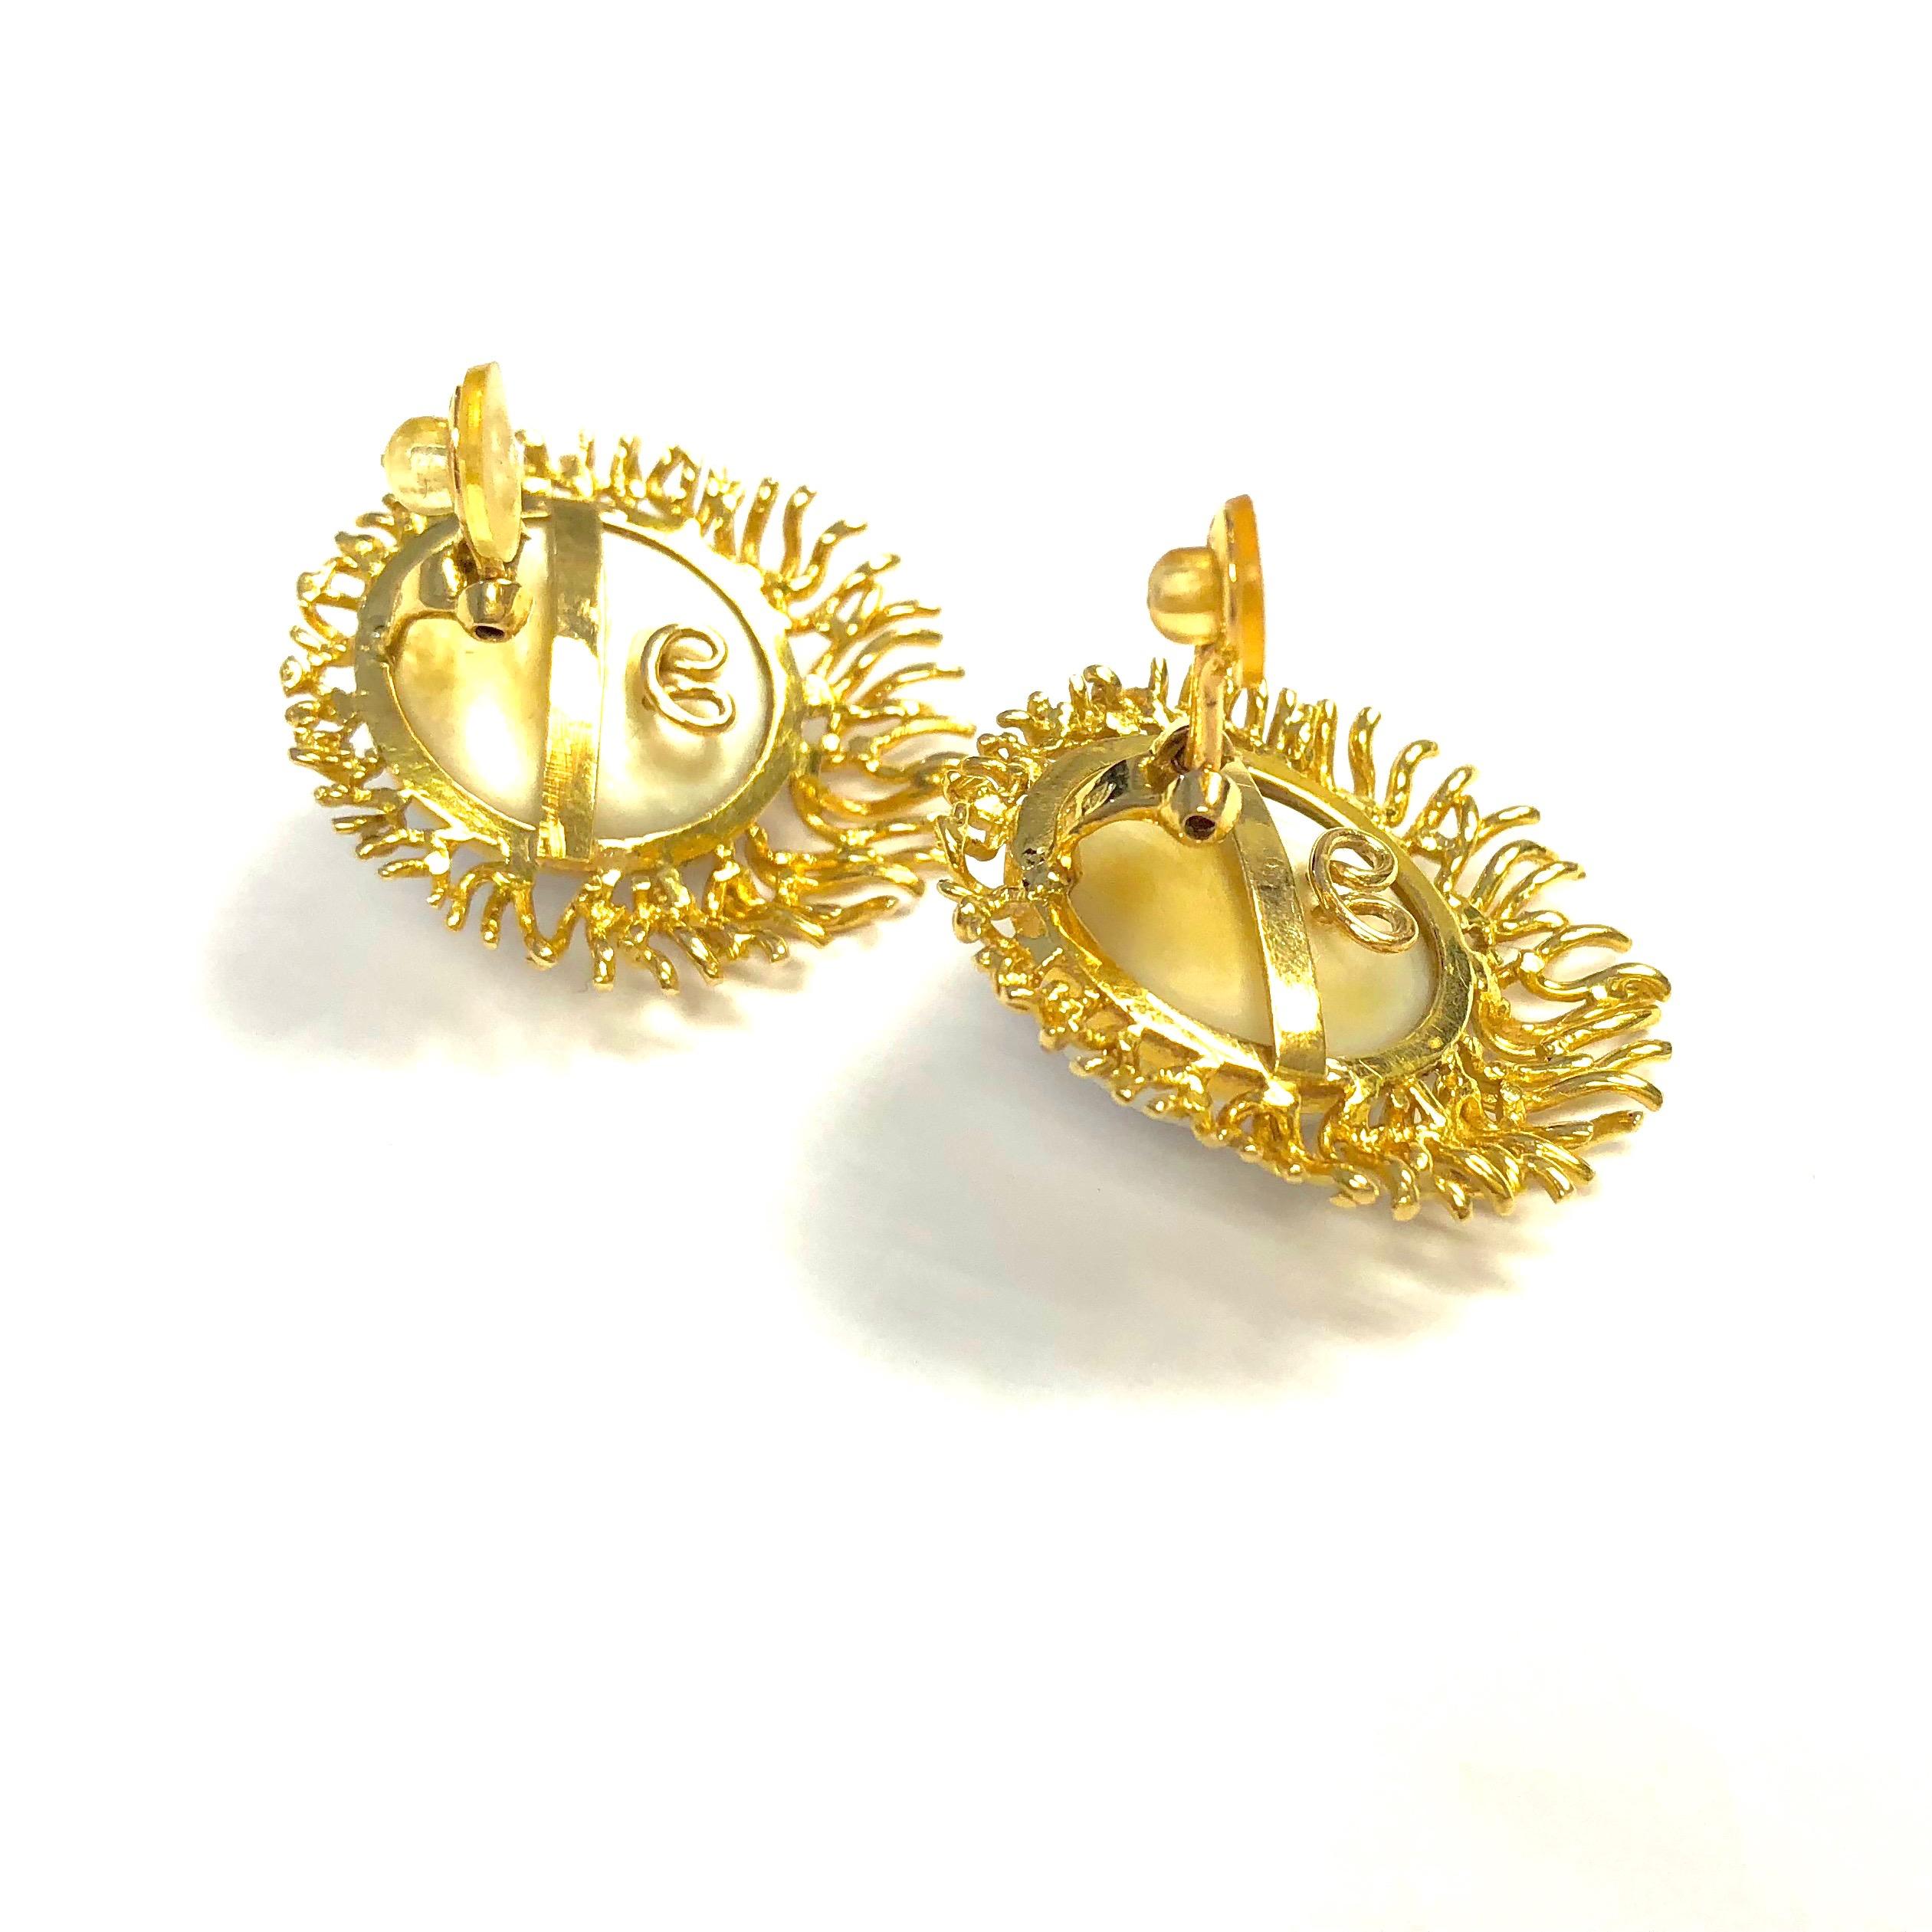 Crafted in 18K yellow gold, the earrings feature white South Sea mabe pearls in the center, measuring 20 mm in diameter. 
Each earring measures: 1 1/2